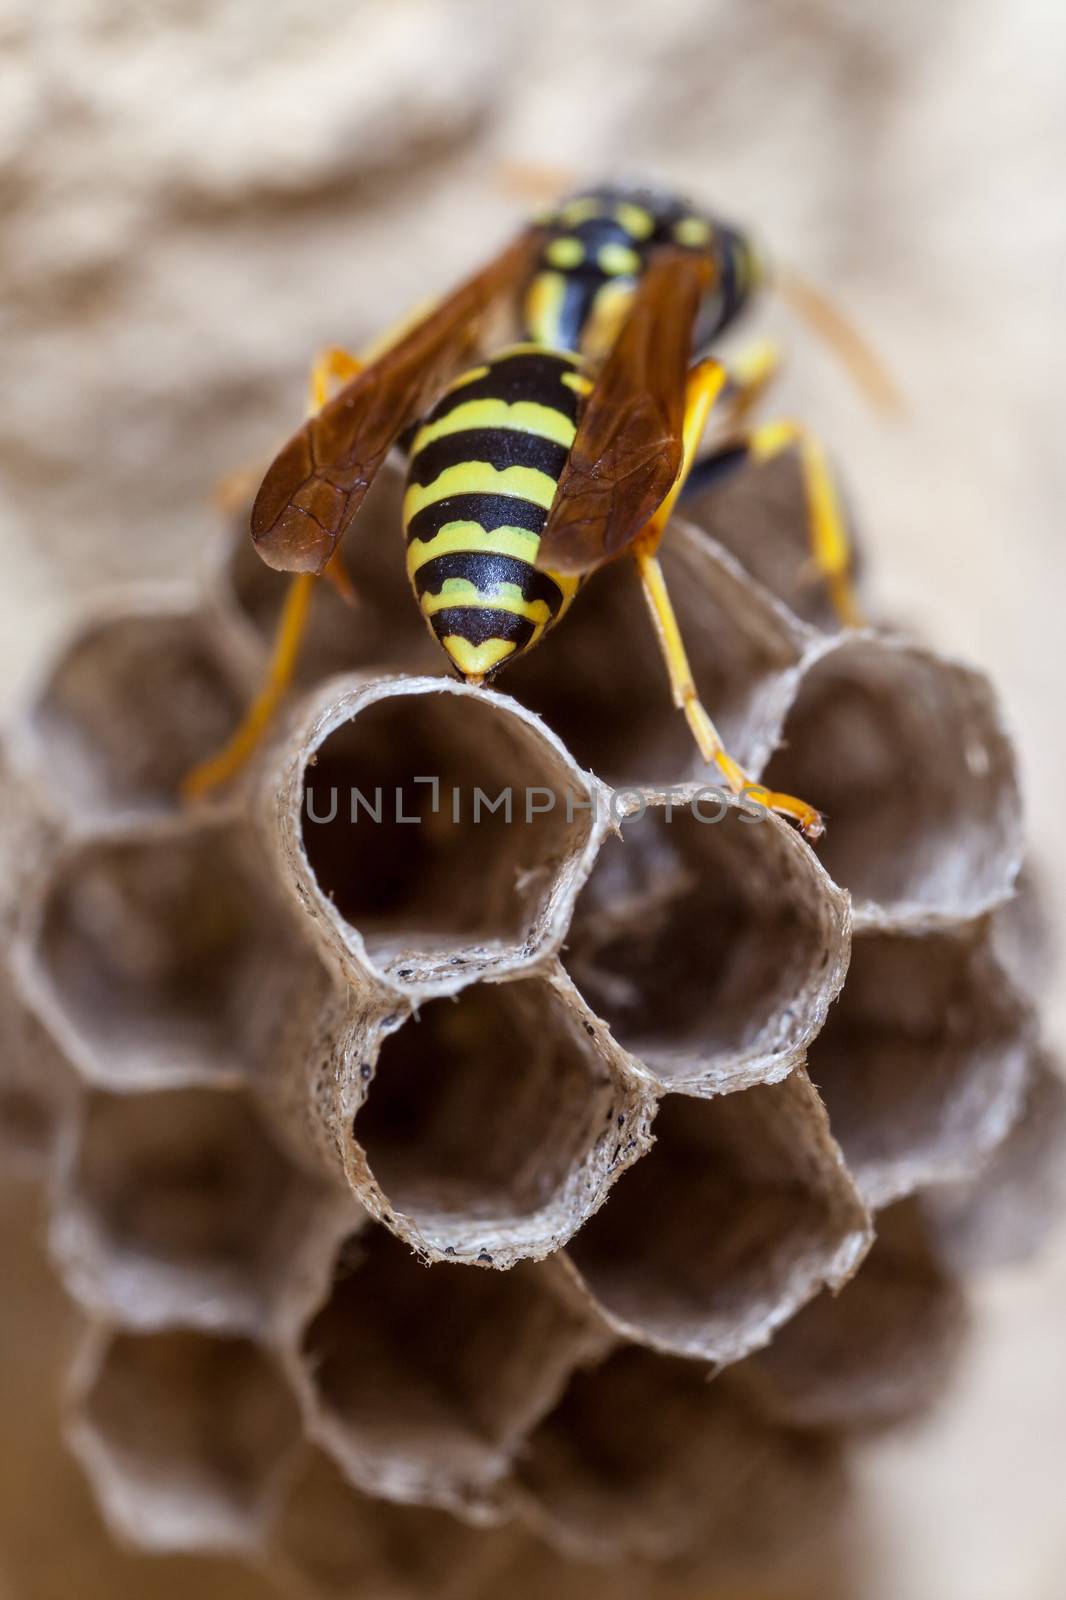 Paper Wasp Queen by PhotoWorks